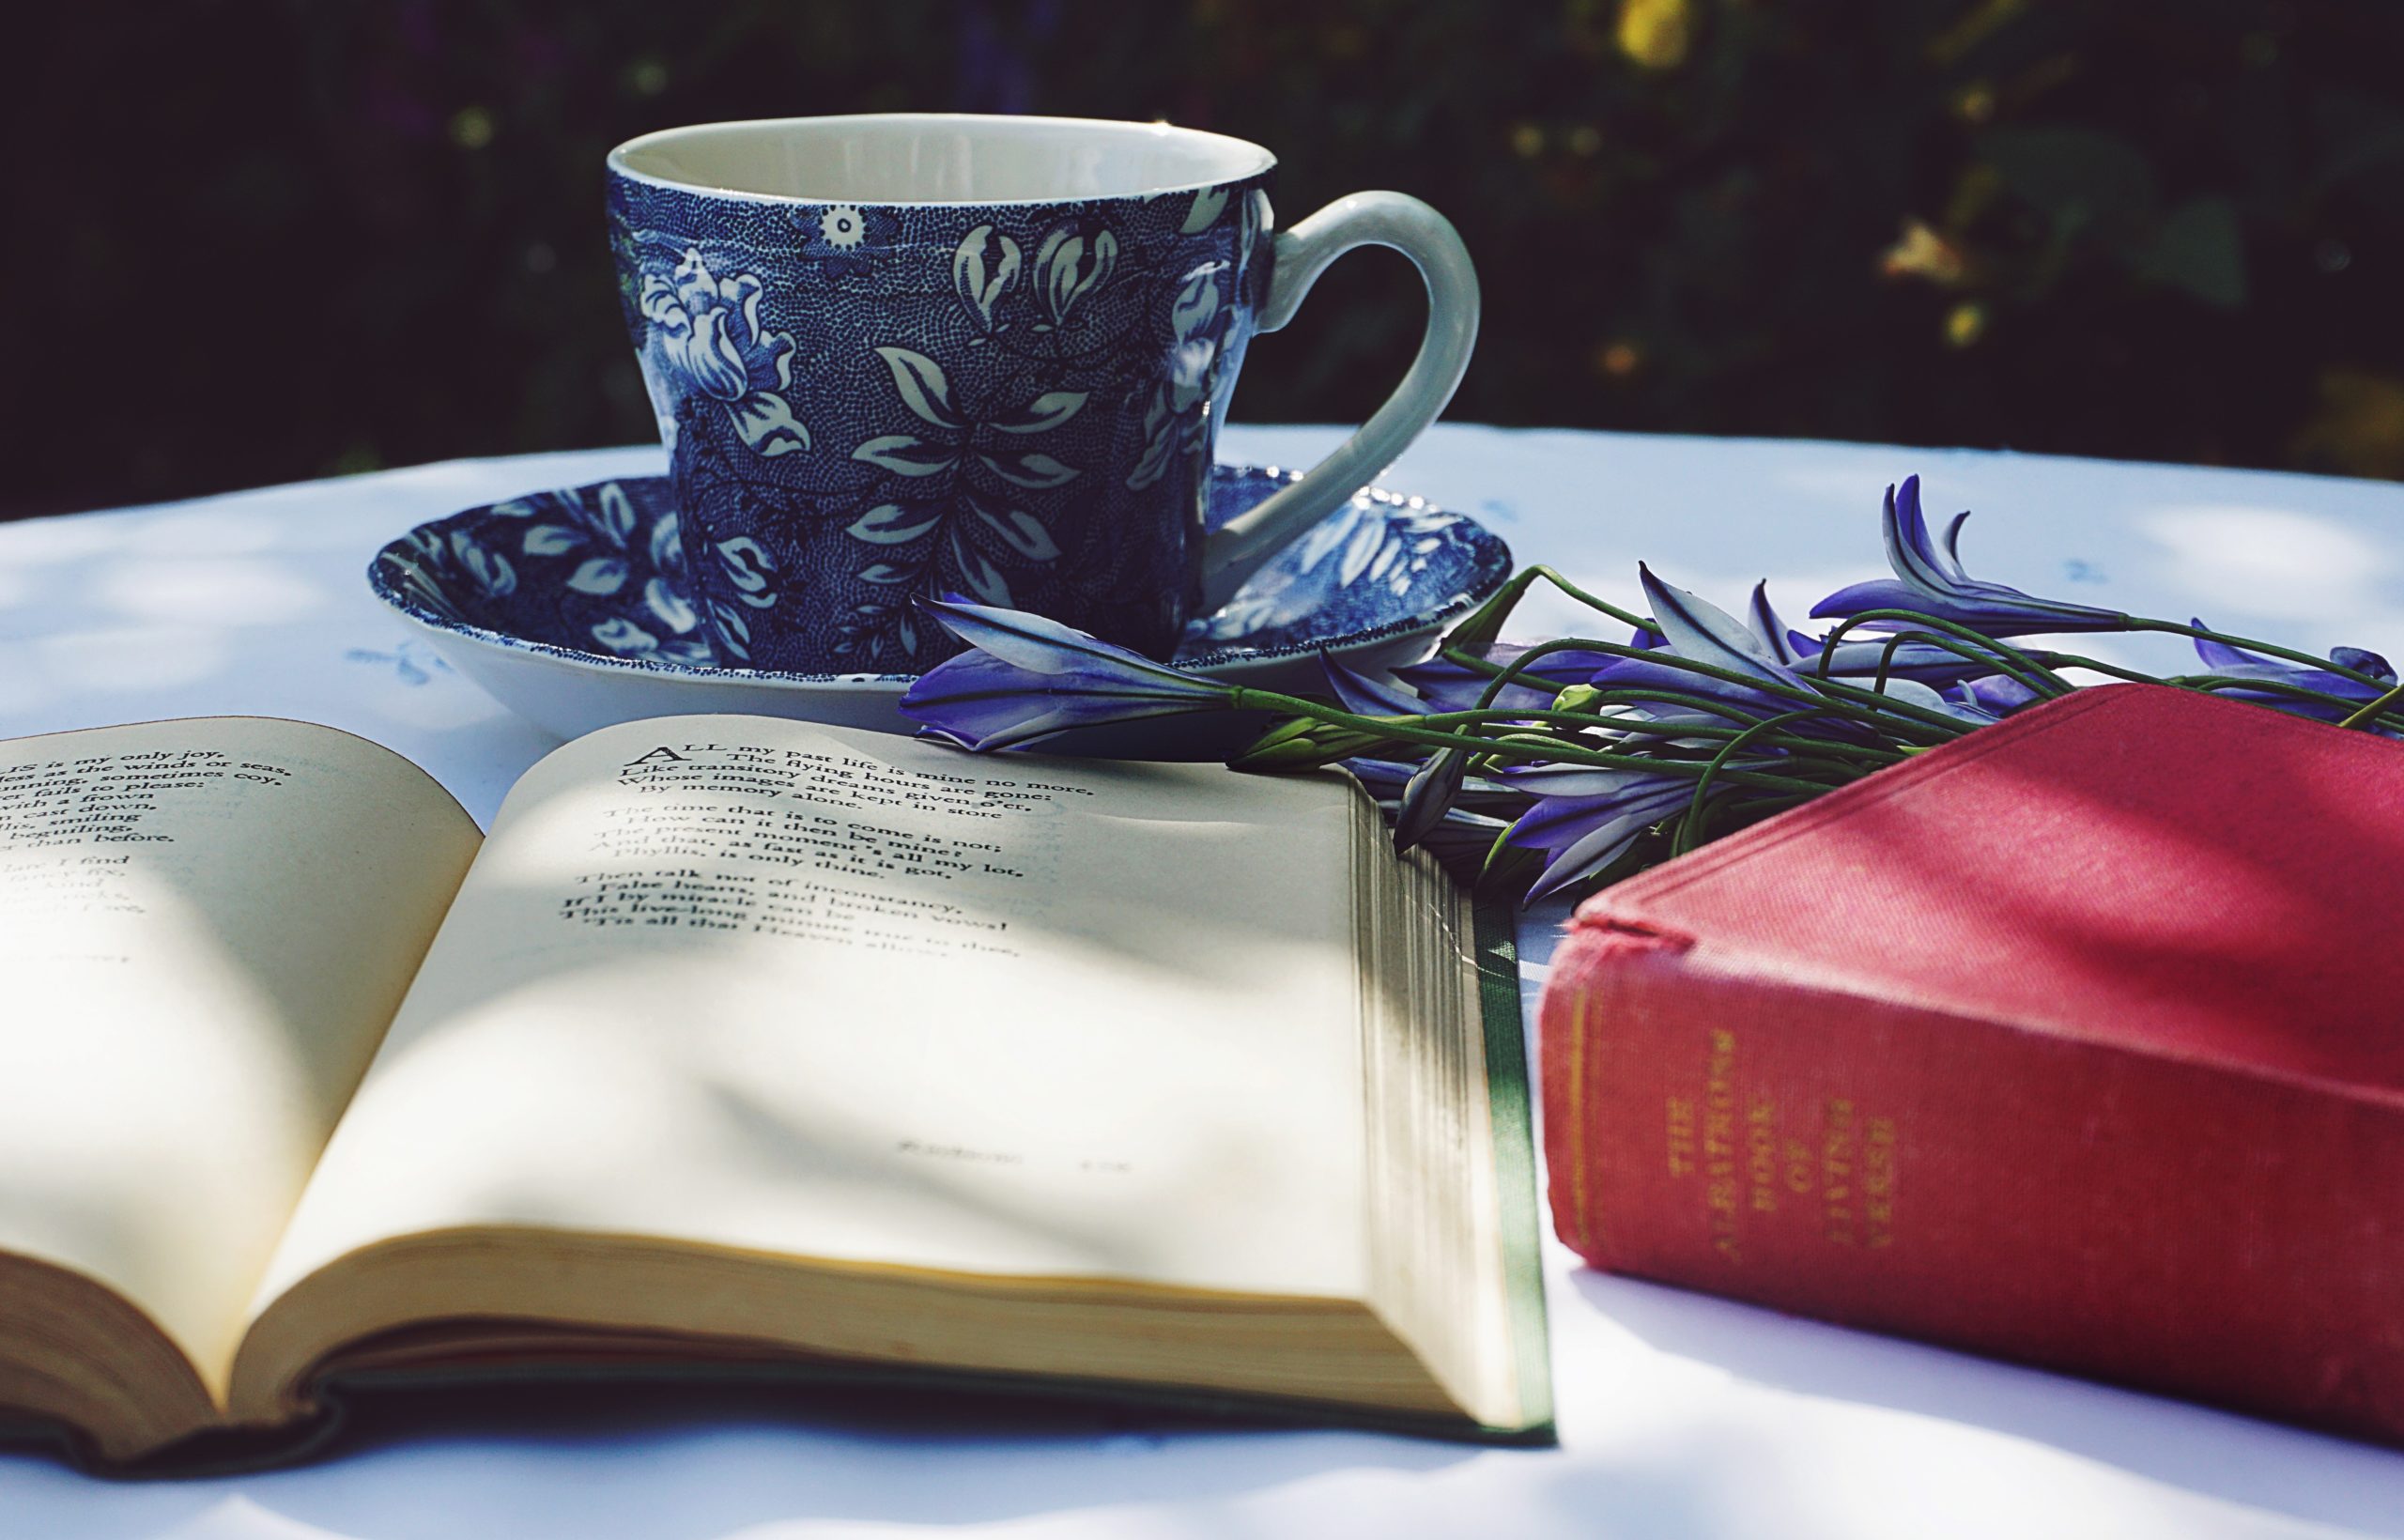 A book of poetry sitting on a table, along with a cup of tea in a beautiful china cup.